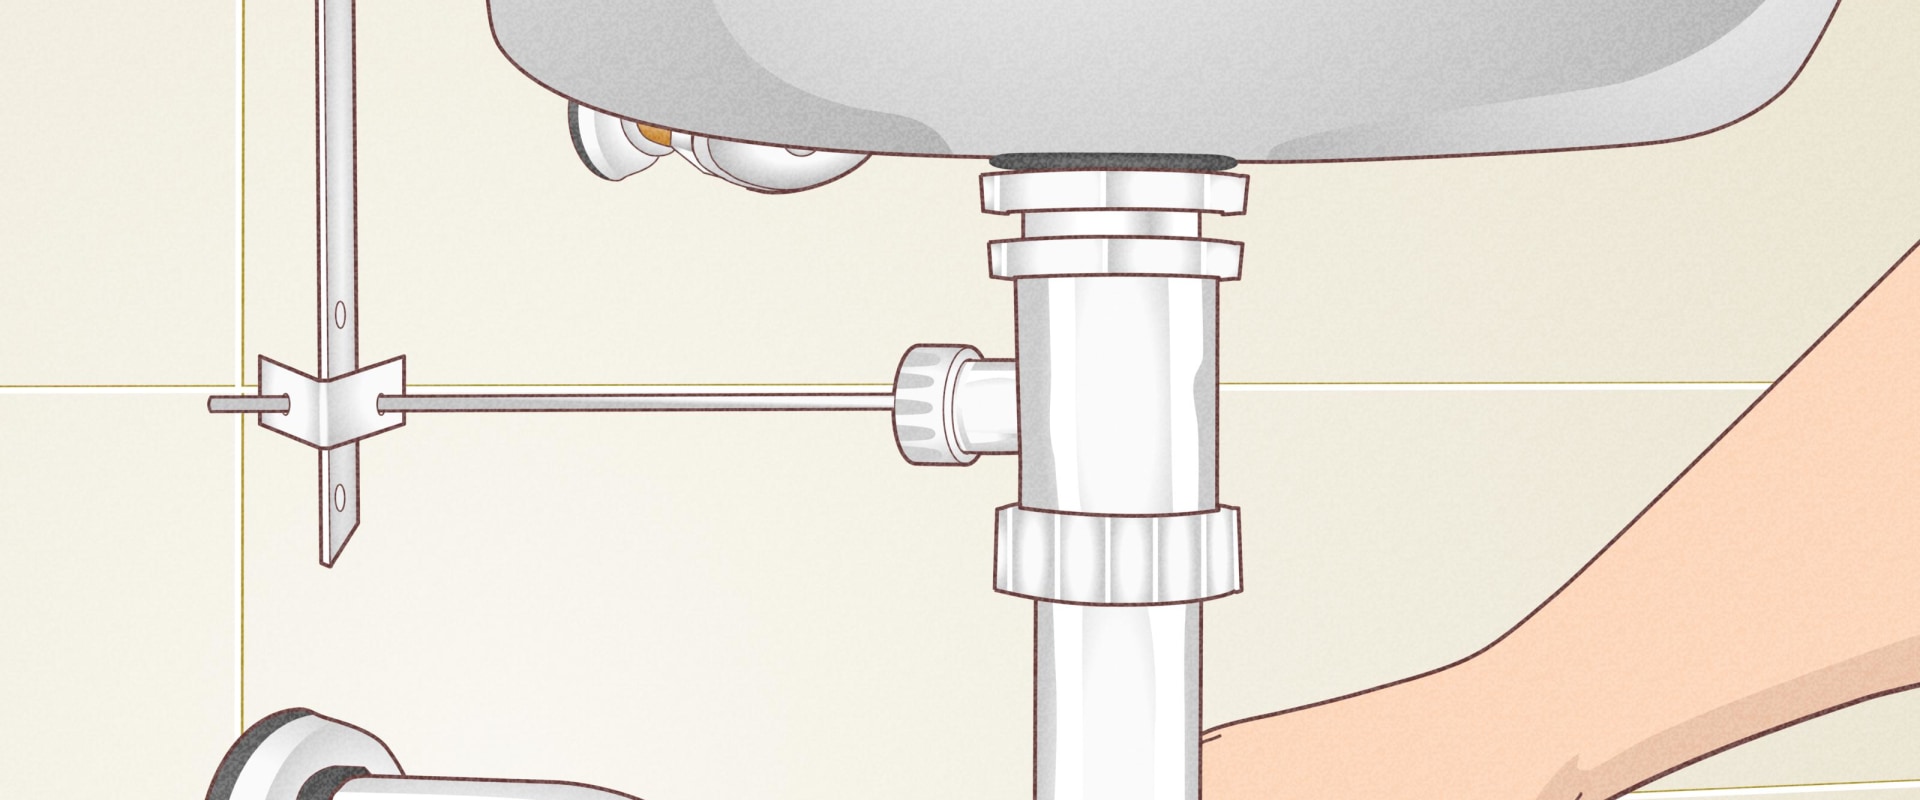 Replacing a Sink Trap: A Step-By-Step Guide